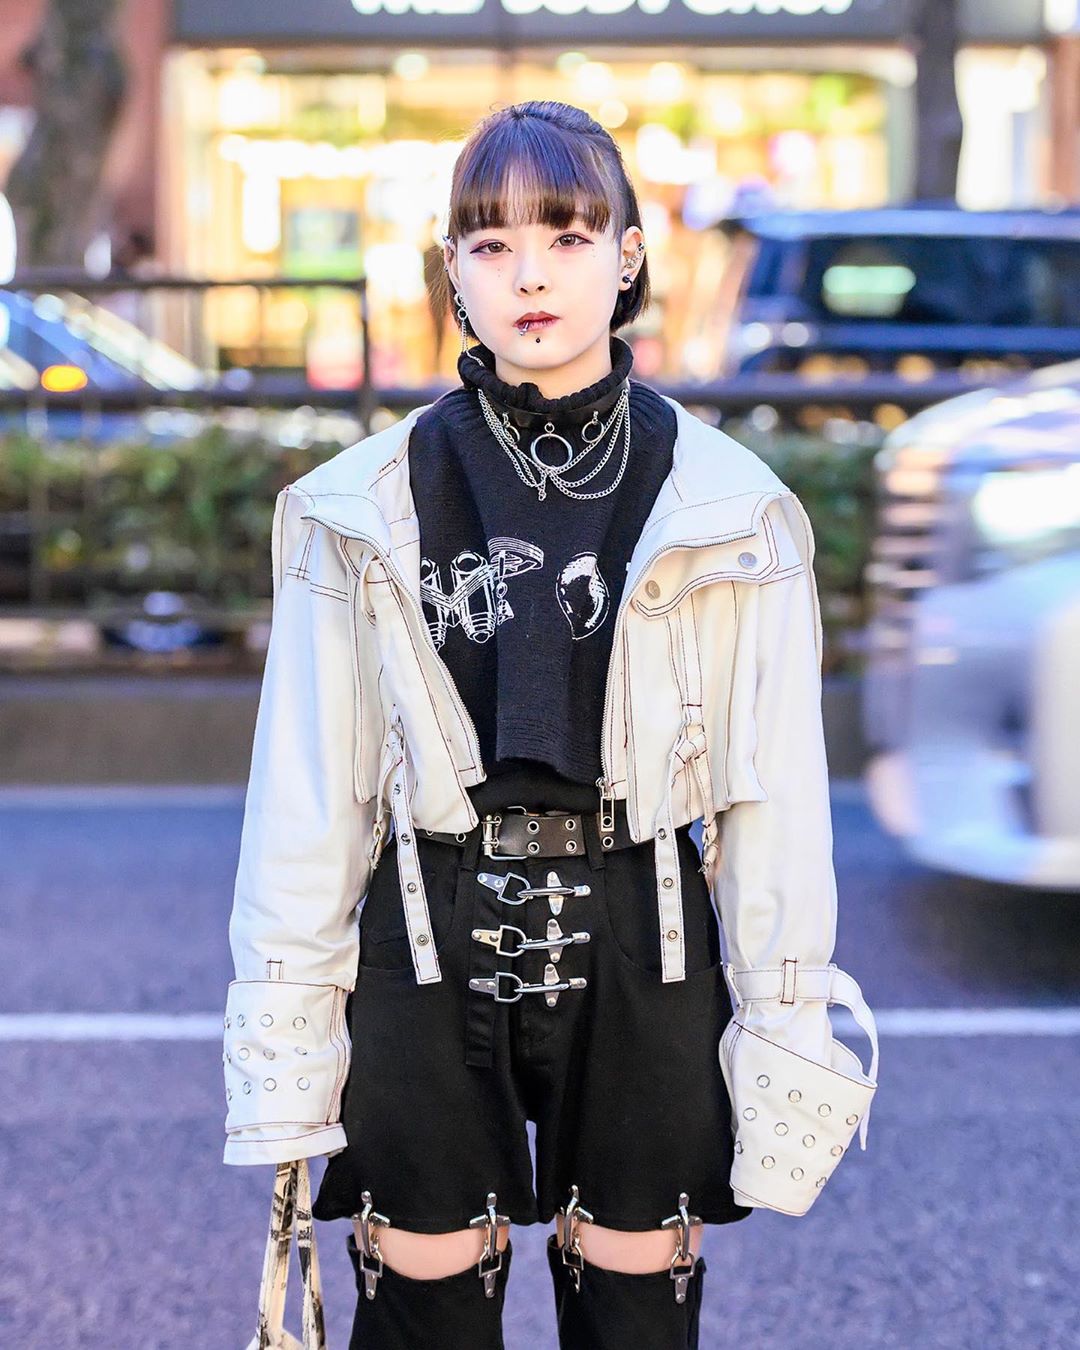 Tokyo Fashion: 17-year-old Japanese student Moena (@_anoyumede_) on the ...